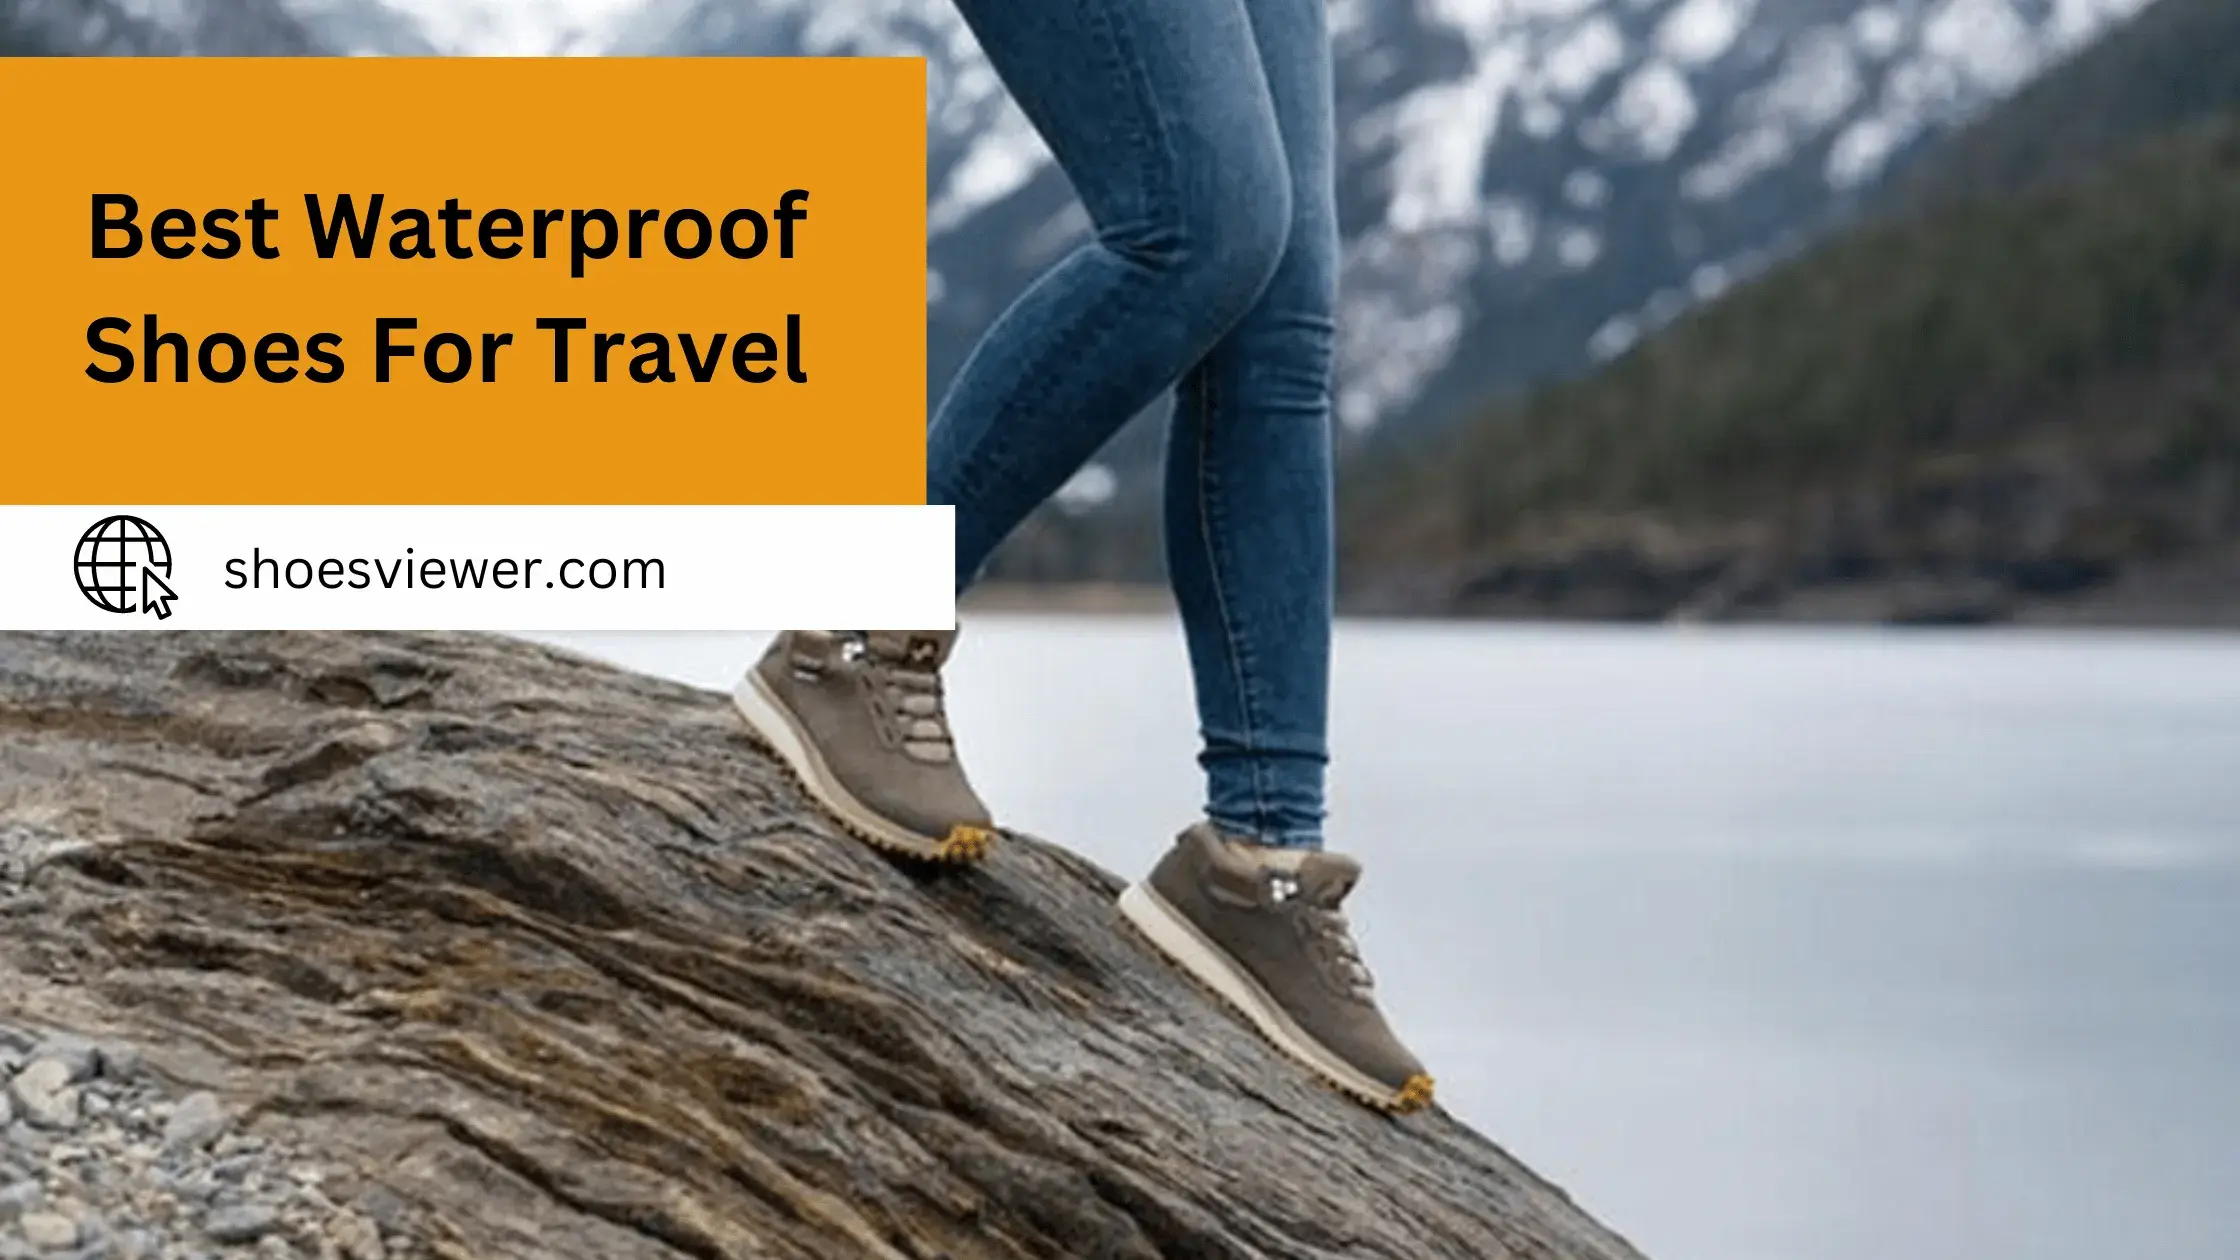 Best Waterproof Shoes For Travel - (An In-Depth Guide)